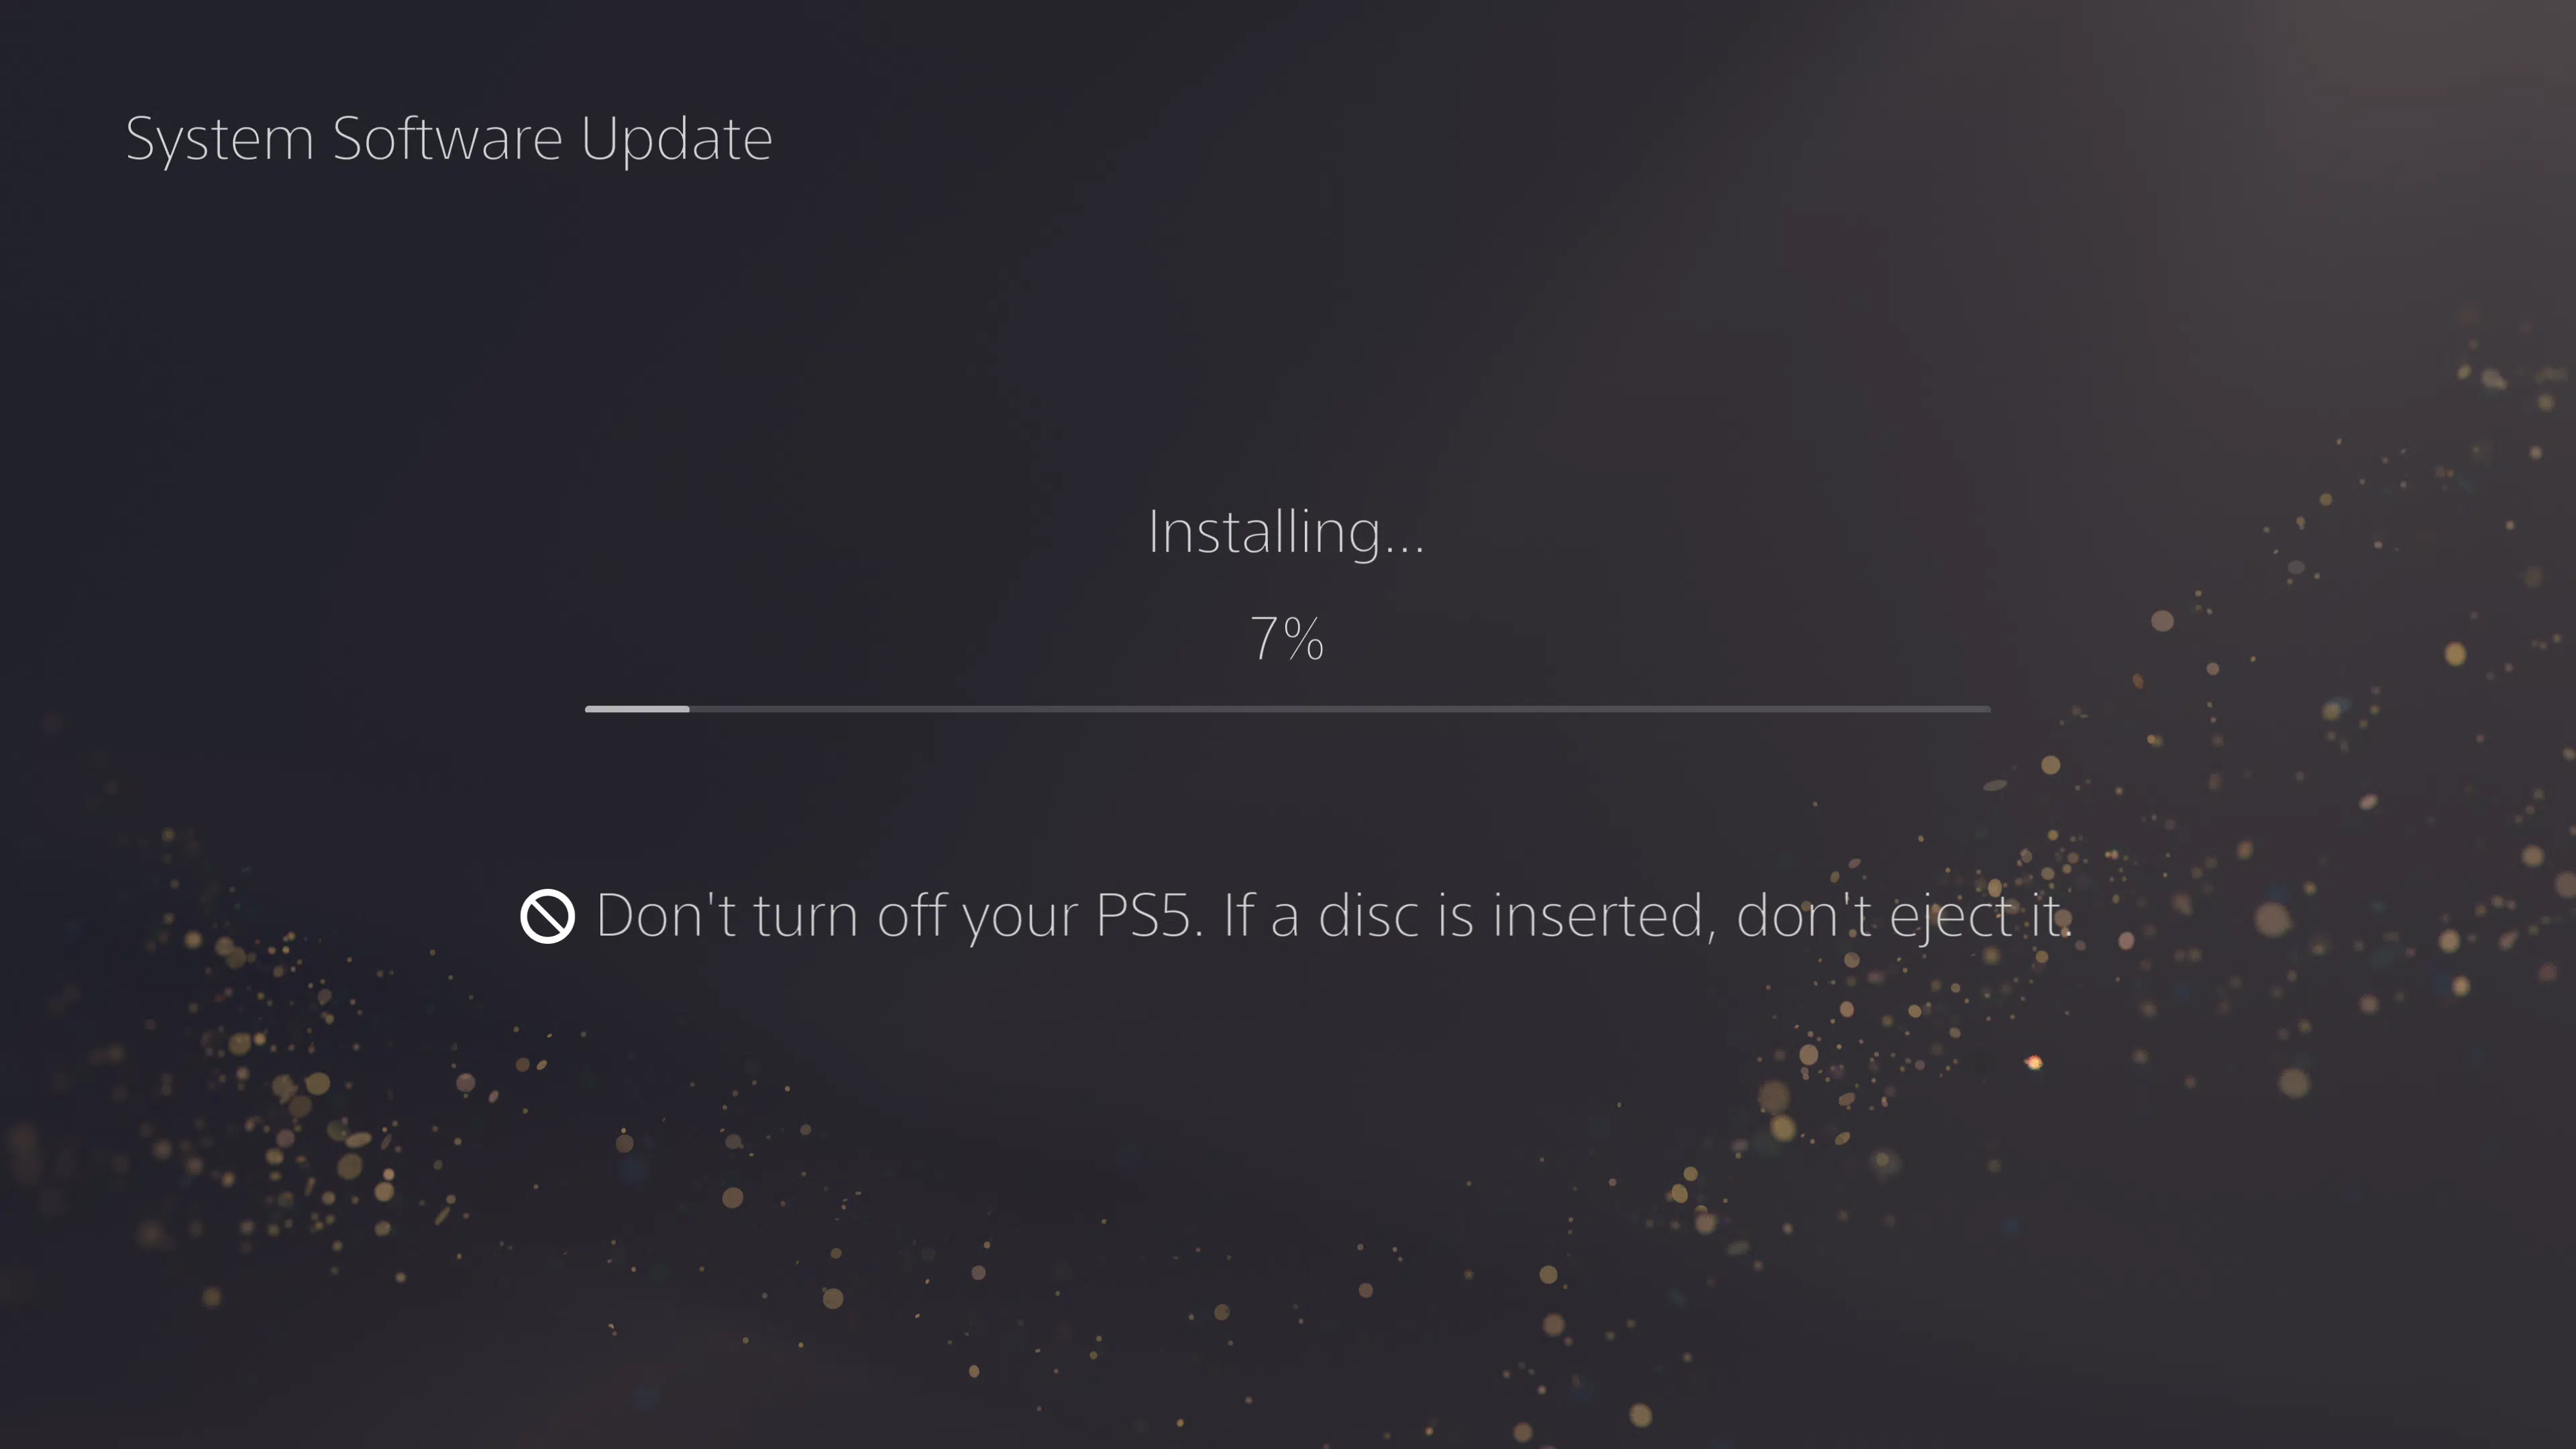 New PS5 Update 21.02-04.02.00.02-00.00.00.0.0